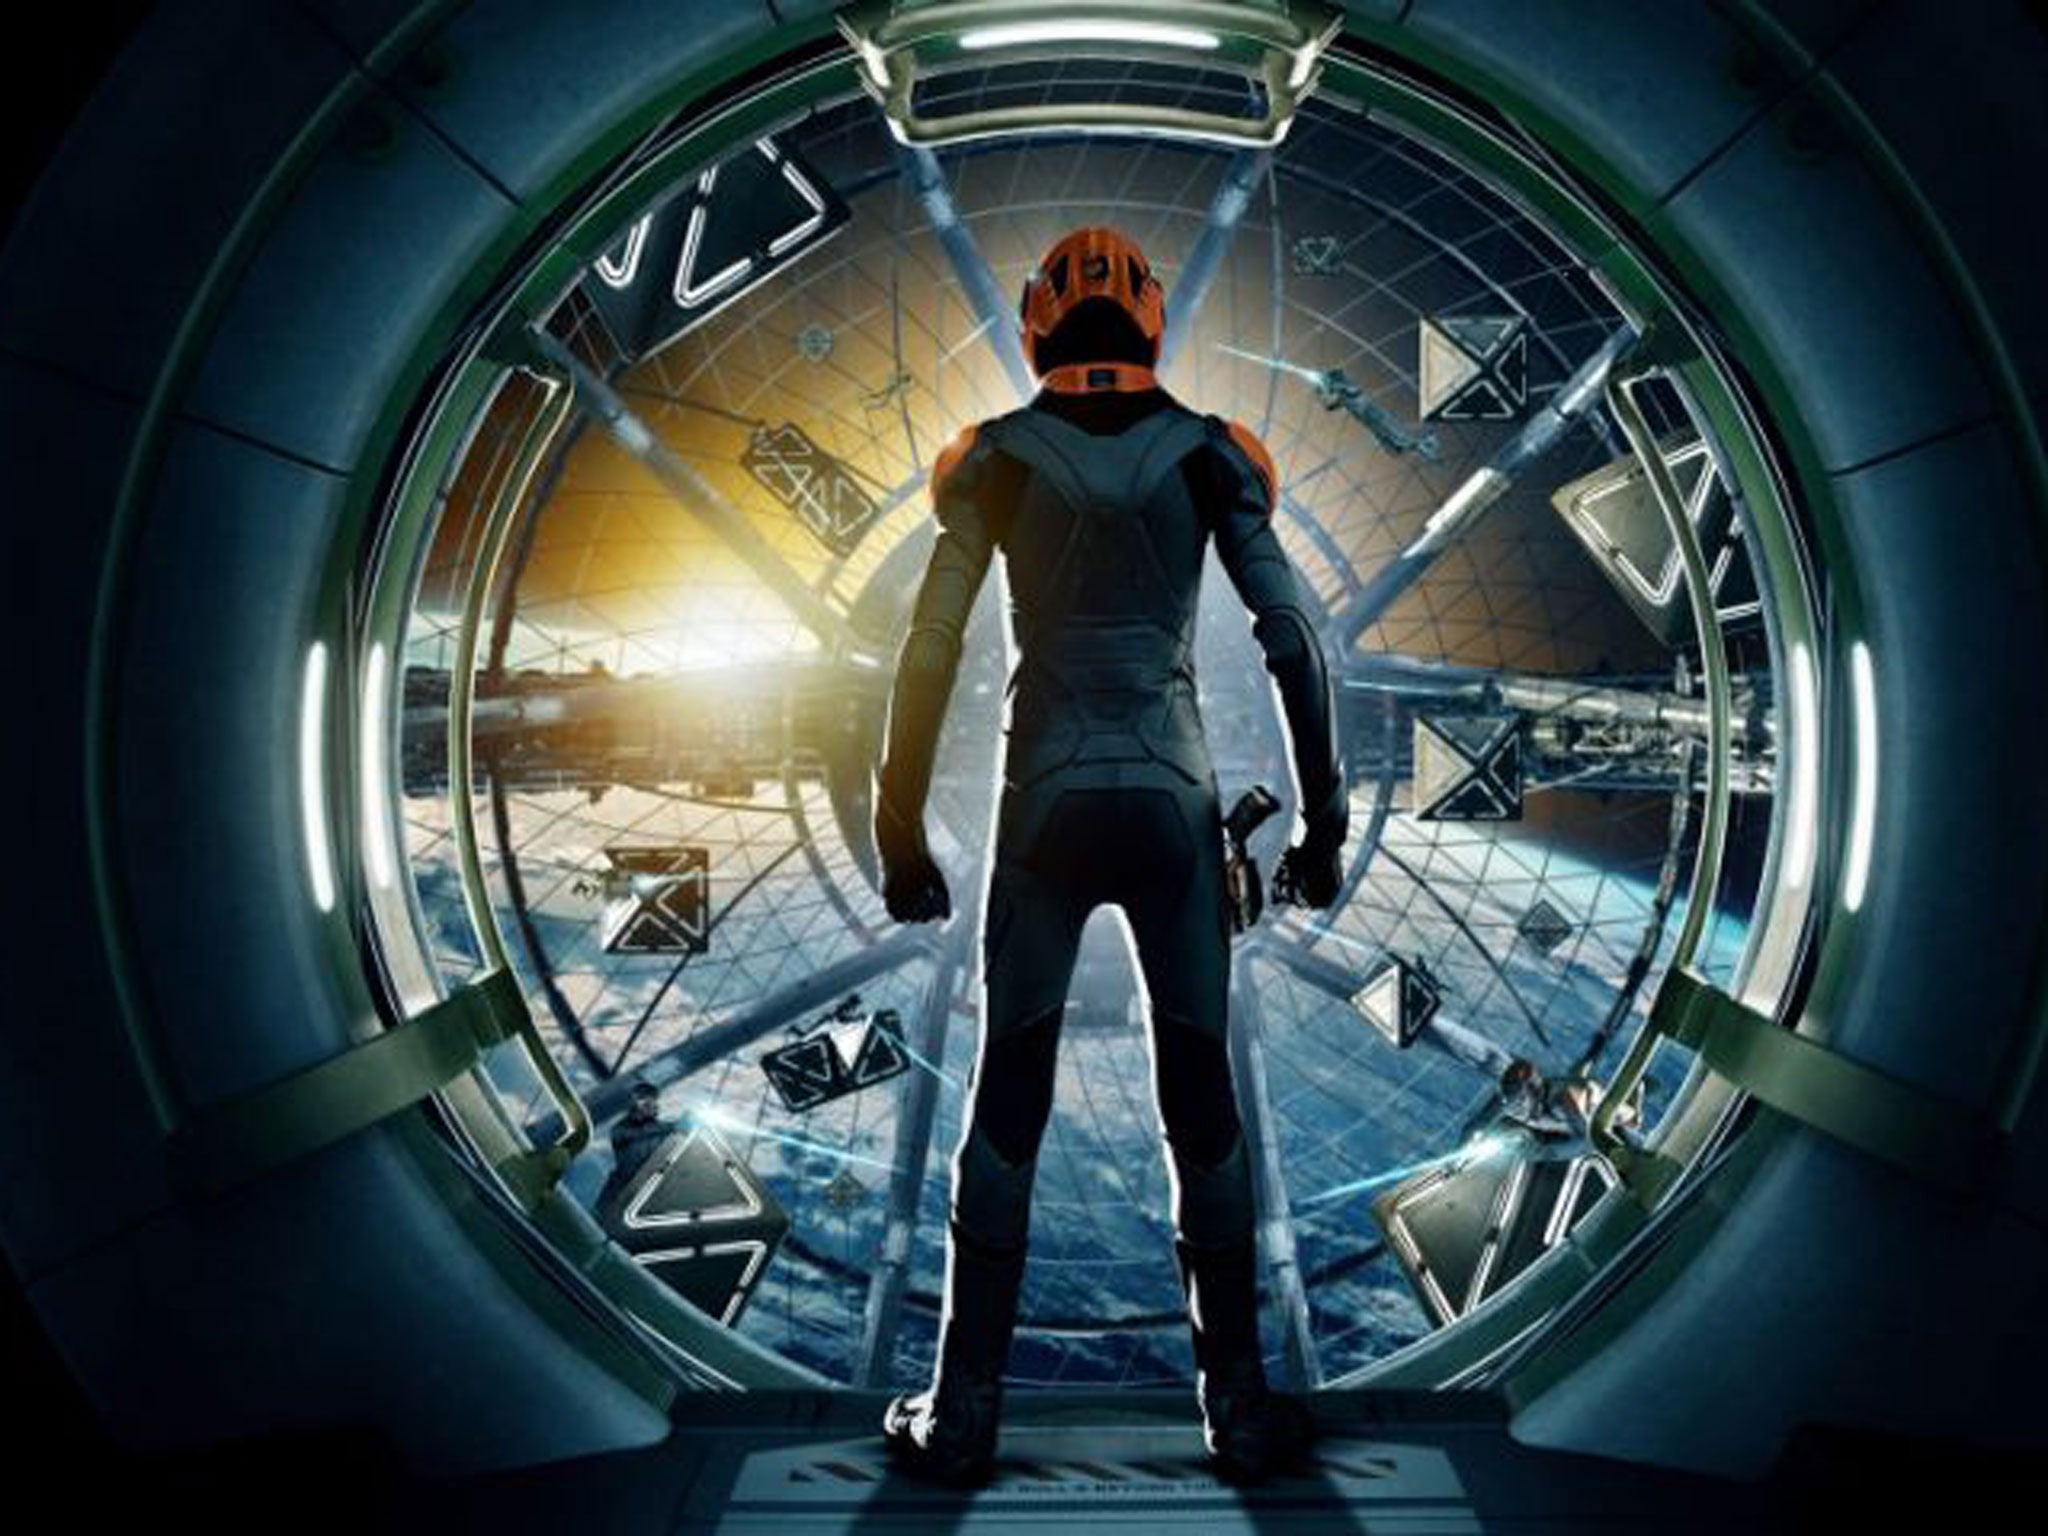 Ender's Game, a dystopian thriller starring Harrison Ford